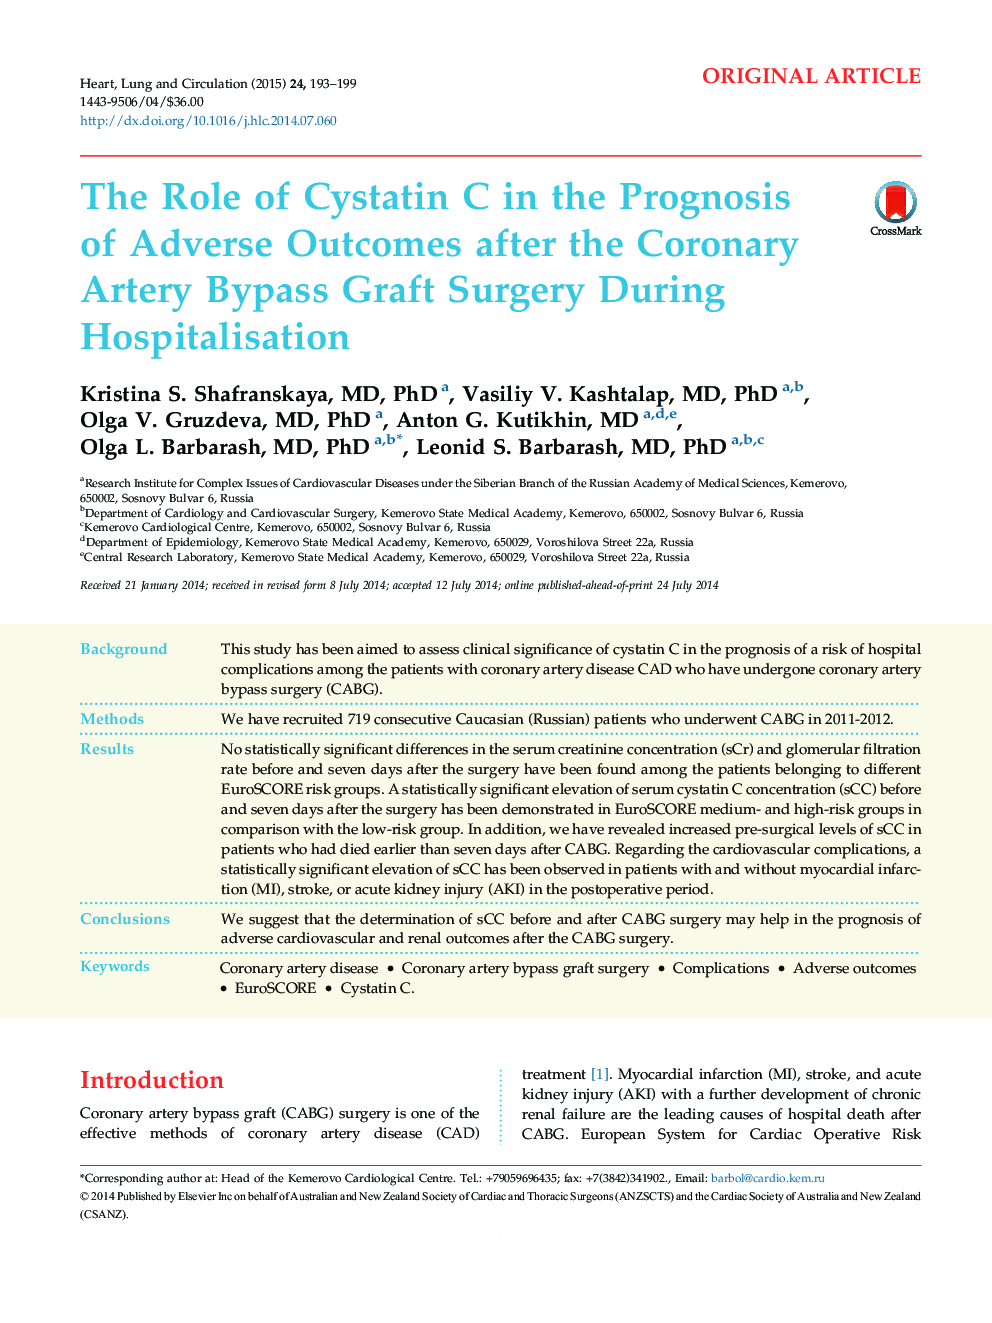 The Role of Cystatin C in the Prognosis of Adverse Outcomes after the Coronary Artery Bypass Graft Surgery During Hospitalisation